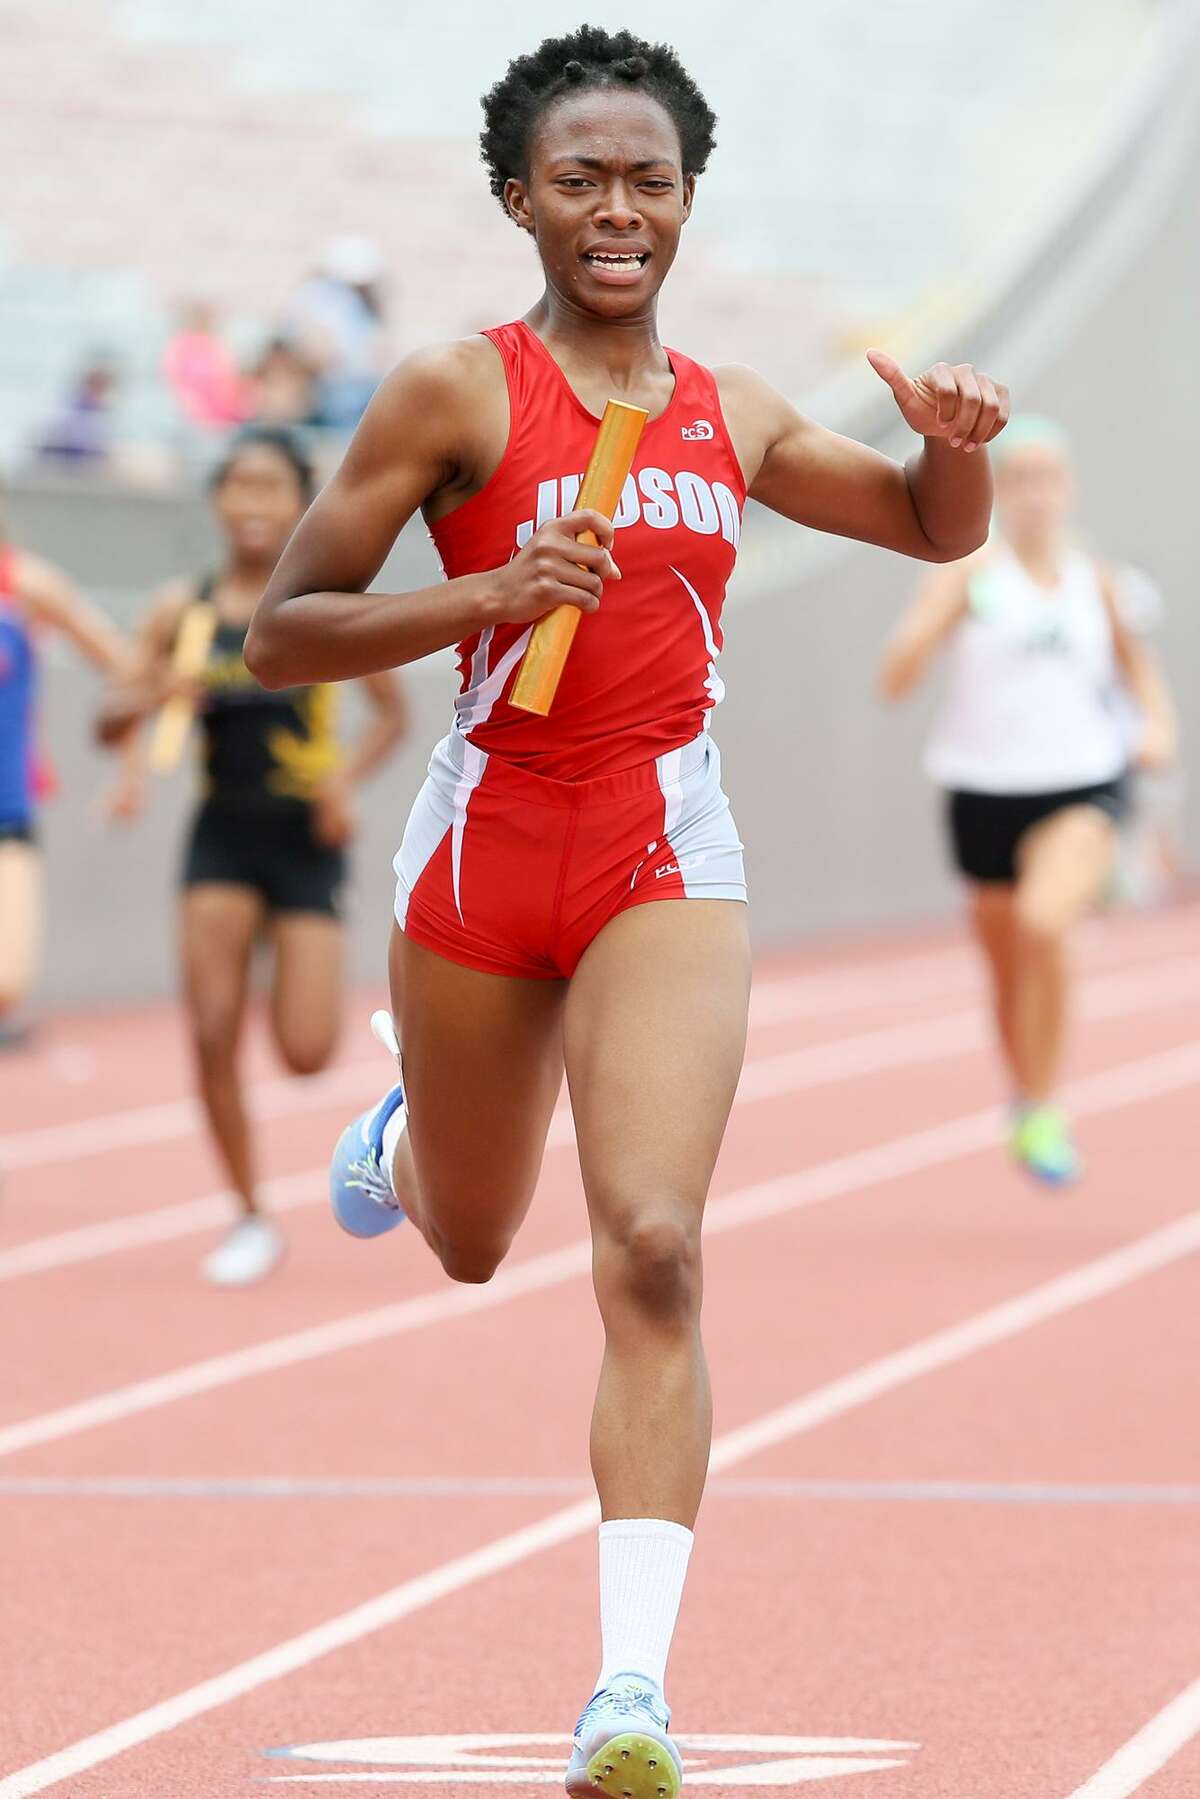 Judson's Kaleigh Dyas crosses the finish line of the 6A girls 800 meter relay during the Region IV-6A and Region IV-5A track and field championships at Alamo Stadium on April 29, 2017. The Judson girls swept the relays at the meet.